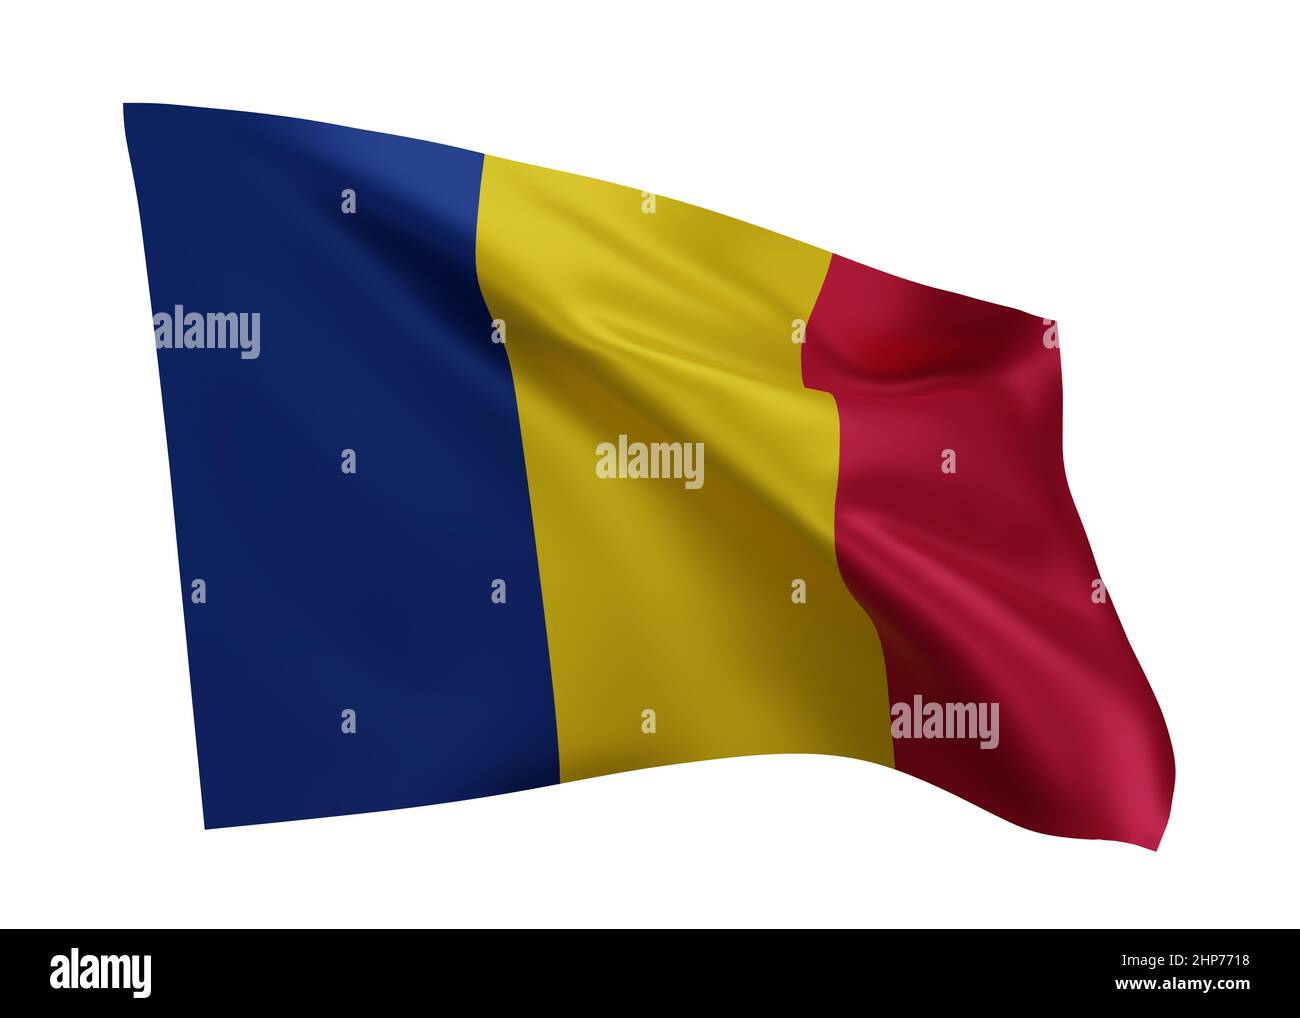 3d illustration flag of Chad. Chadian high resolution flag isolated against white background. 3d rendering Stock Photo